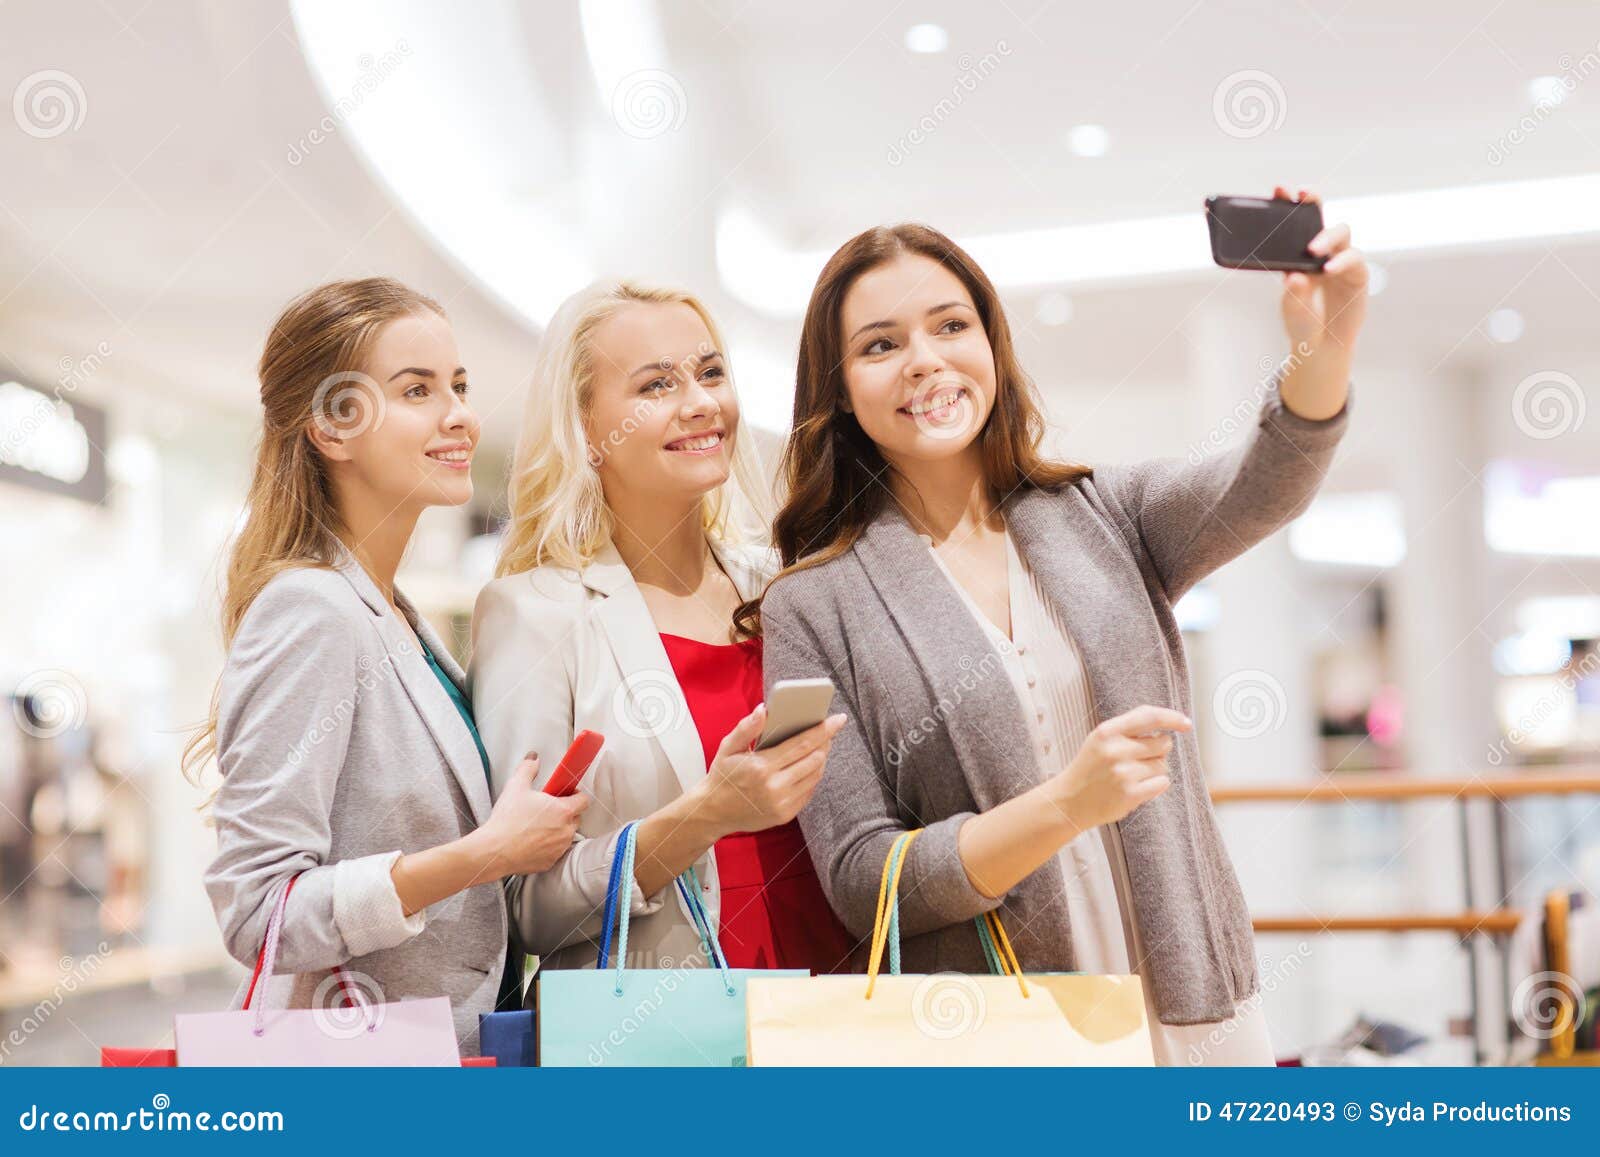 Women with Smartphones Shopping and Taking Selfie Stock Image - Image ...